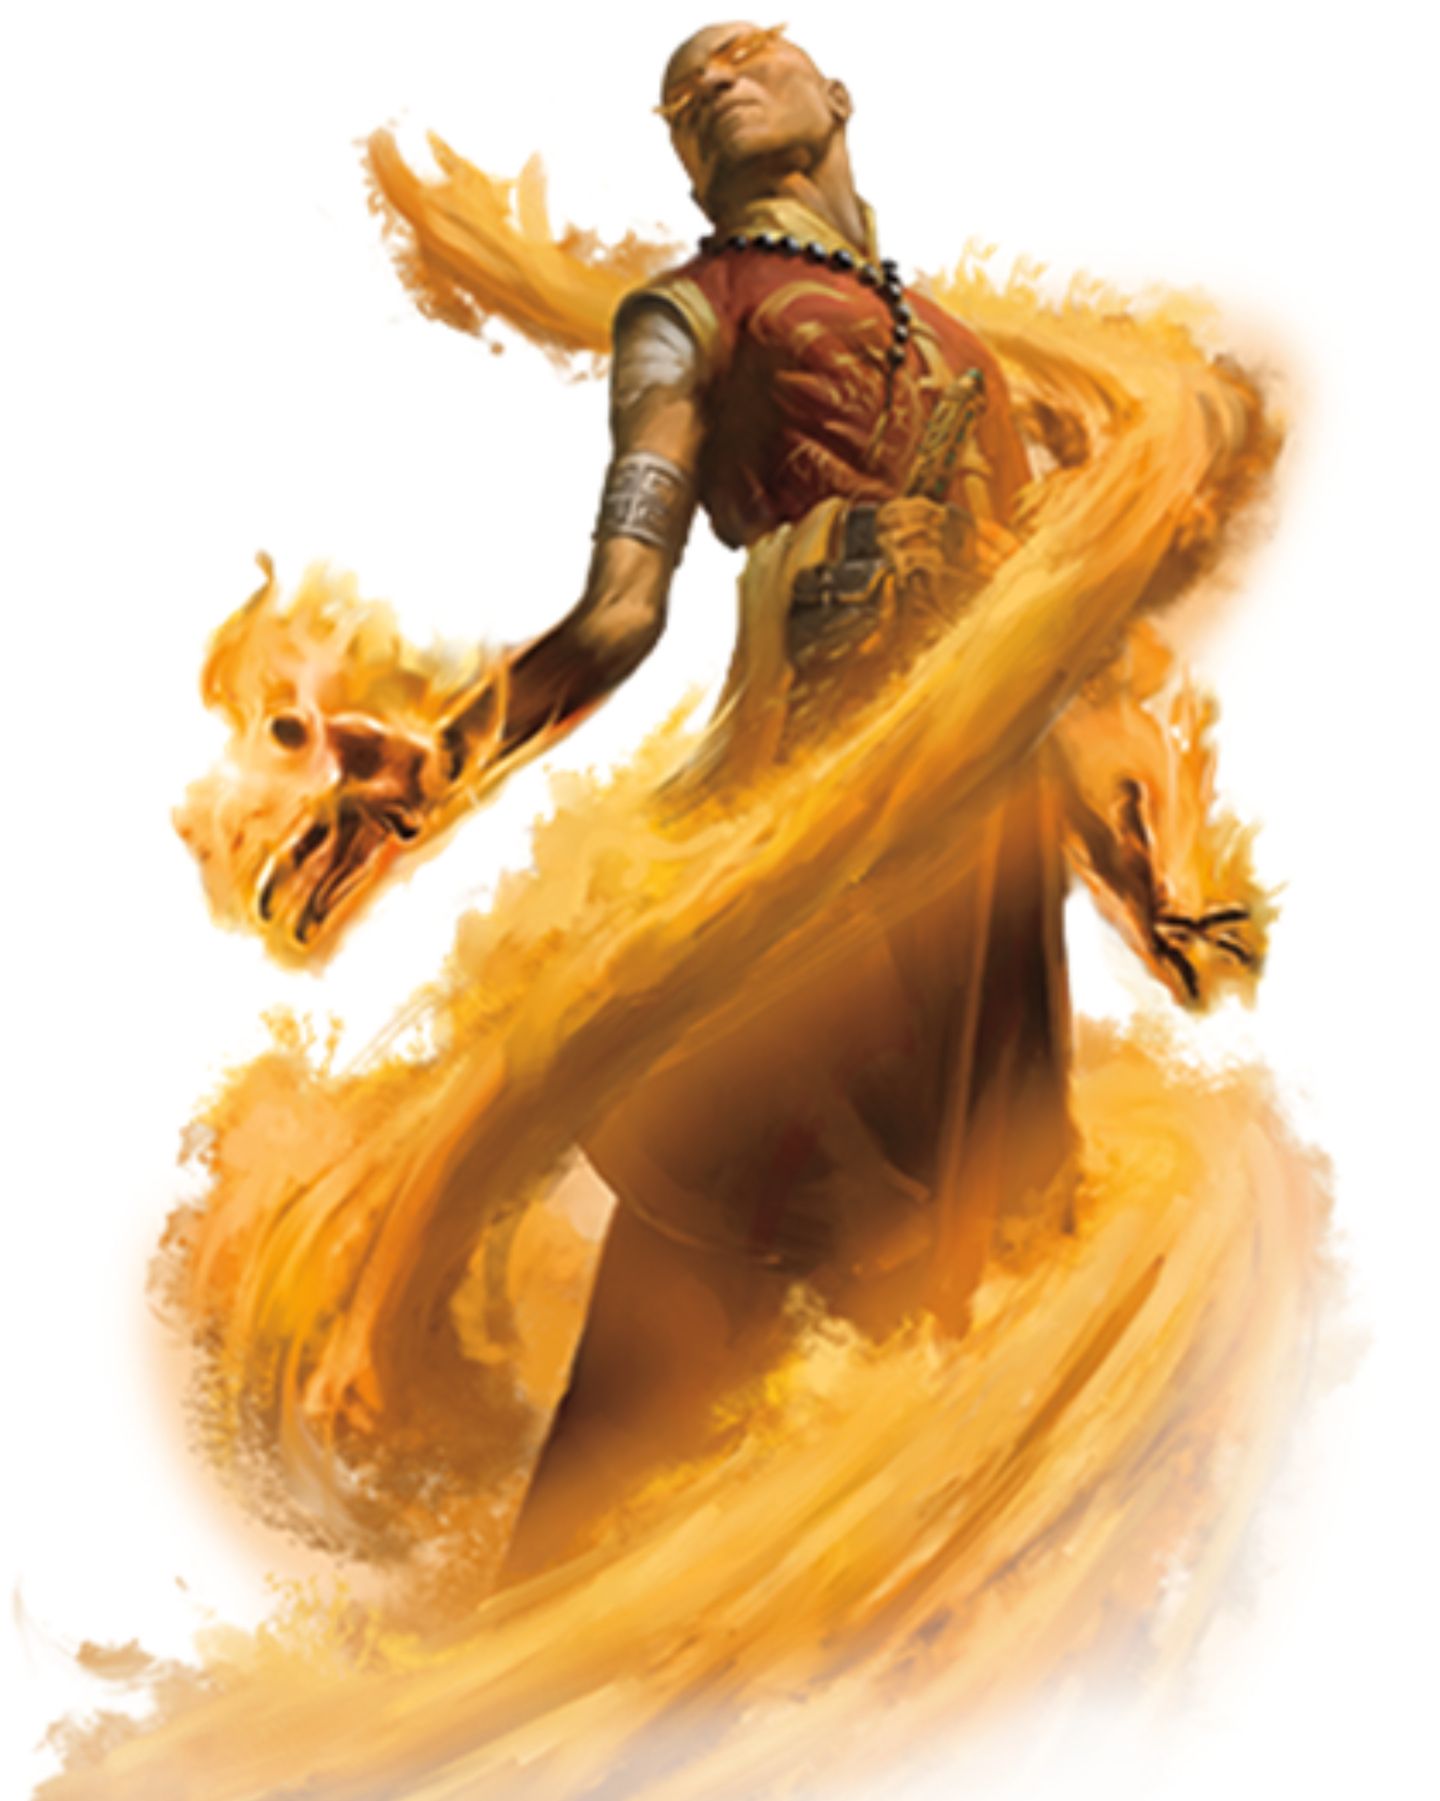 A human Sorcerer is surrounded by a spiral of flames as flames shoot from his eyes.